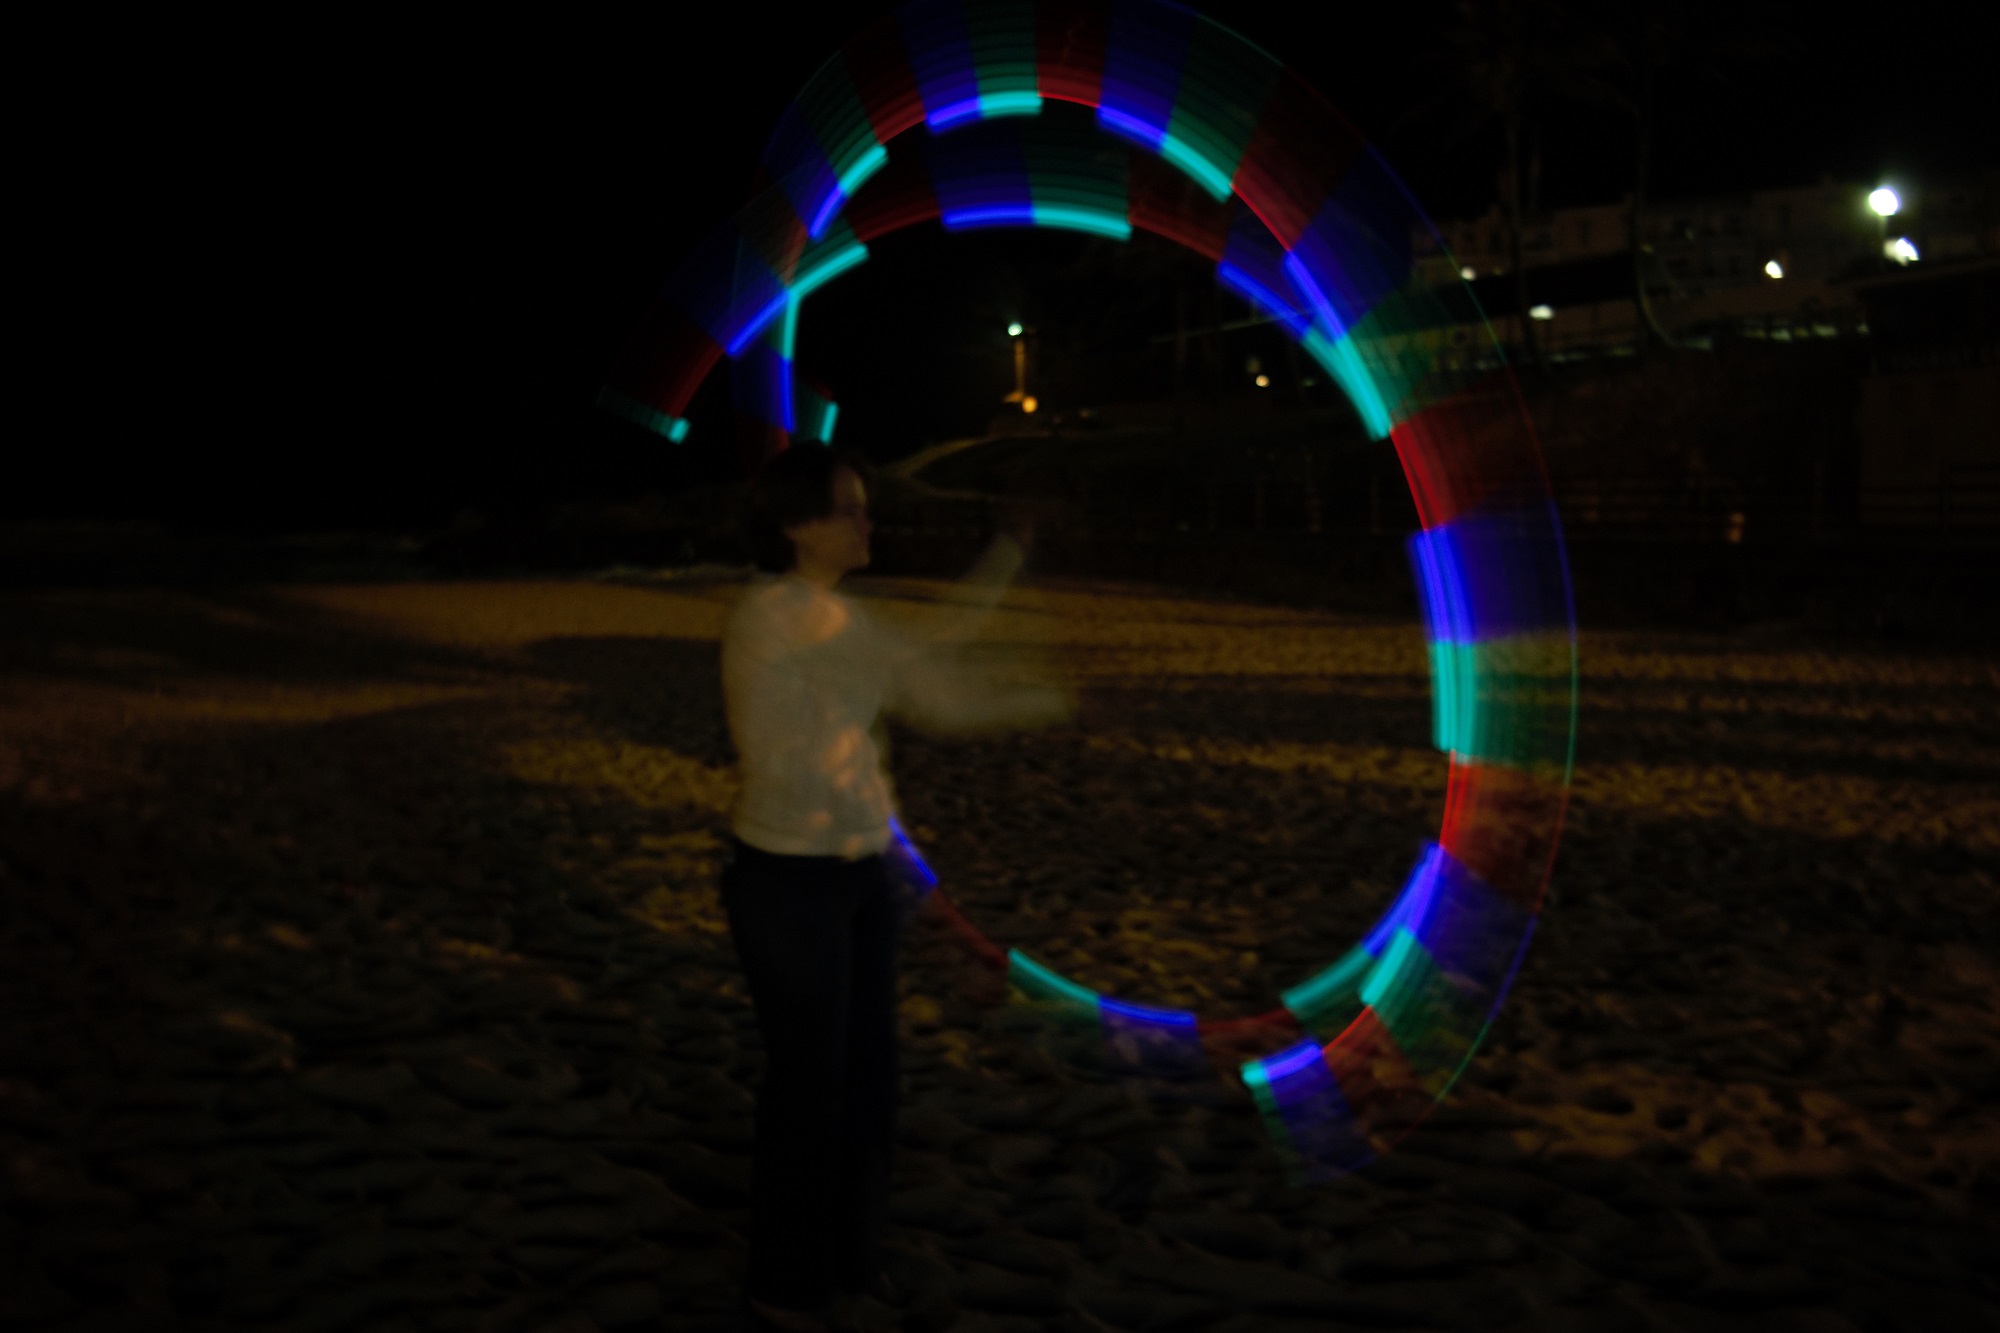 Poi out of focus